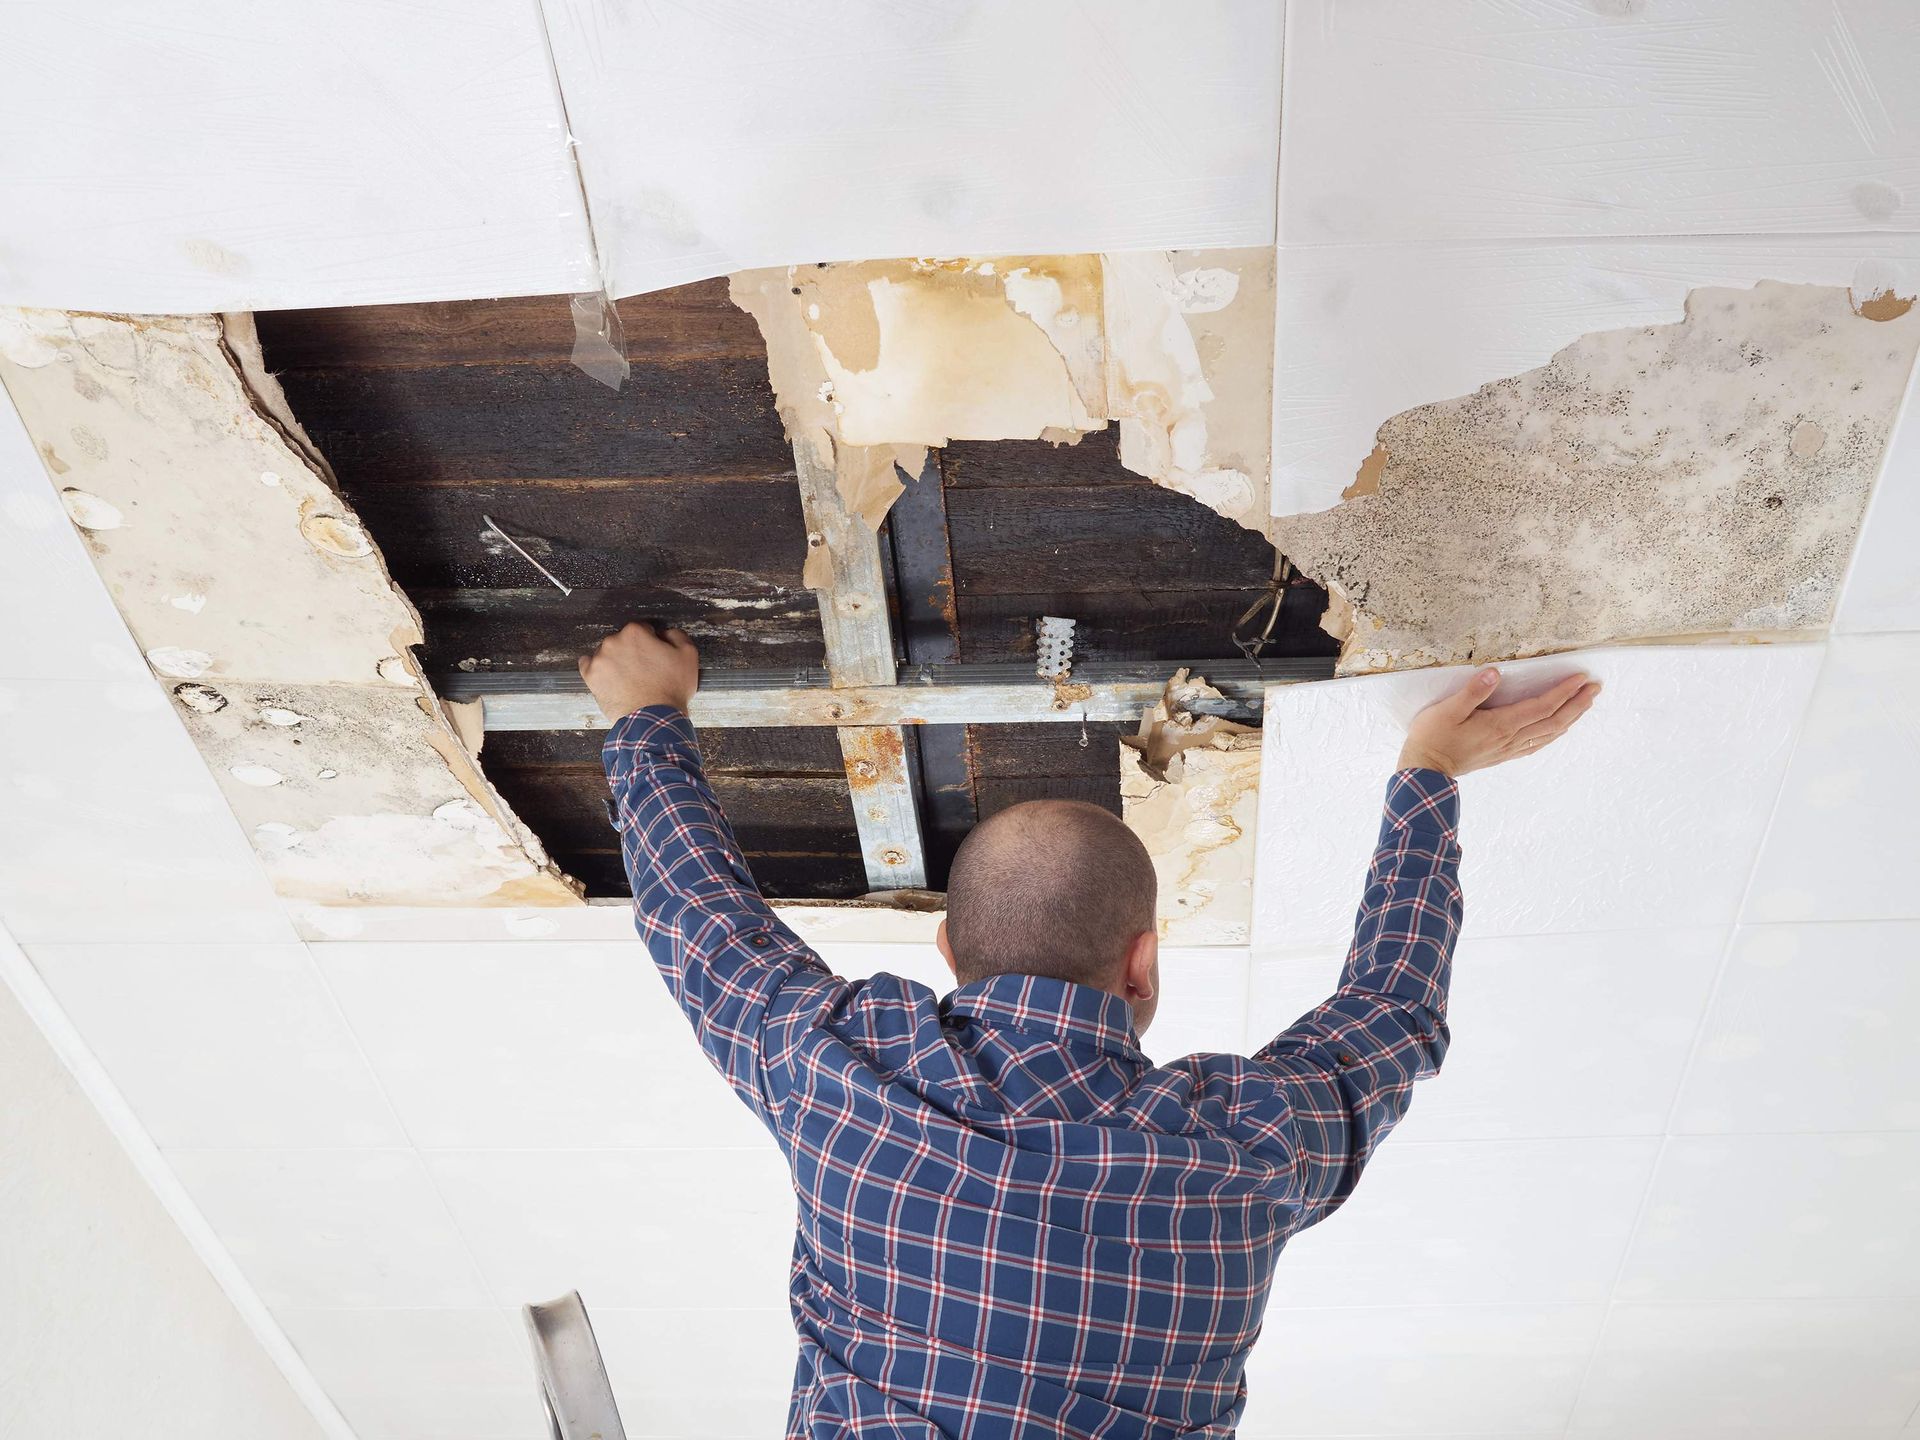 A man is looking through a hole in the ceiling